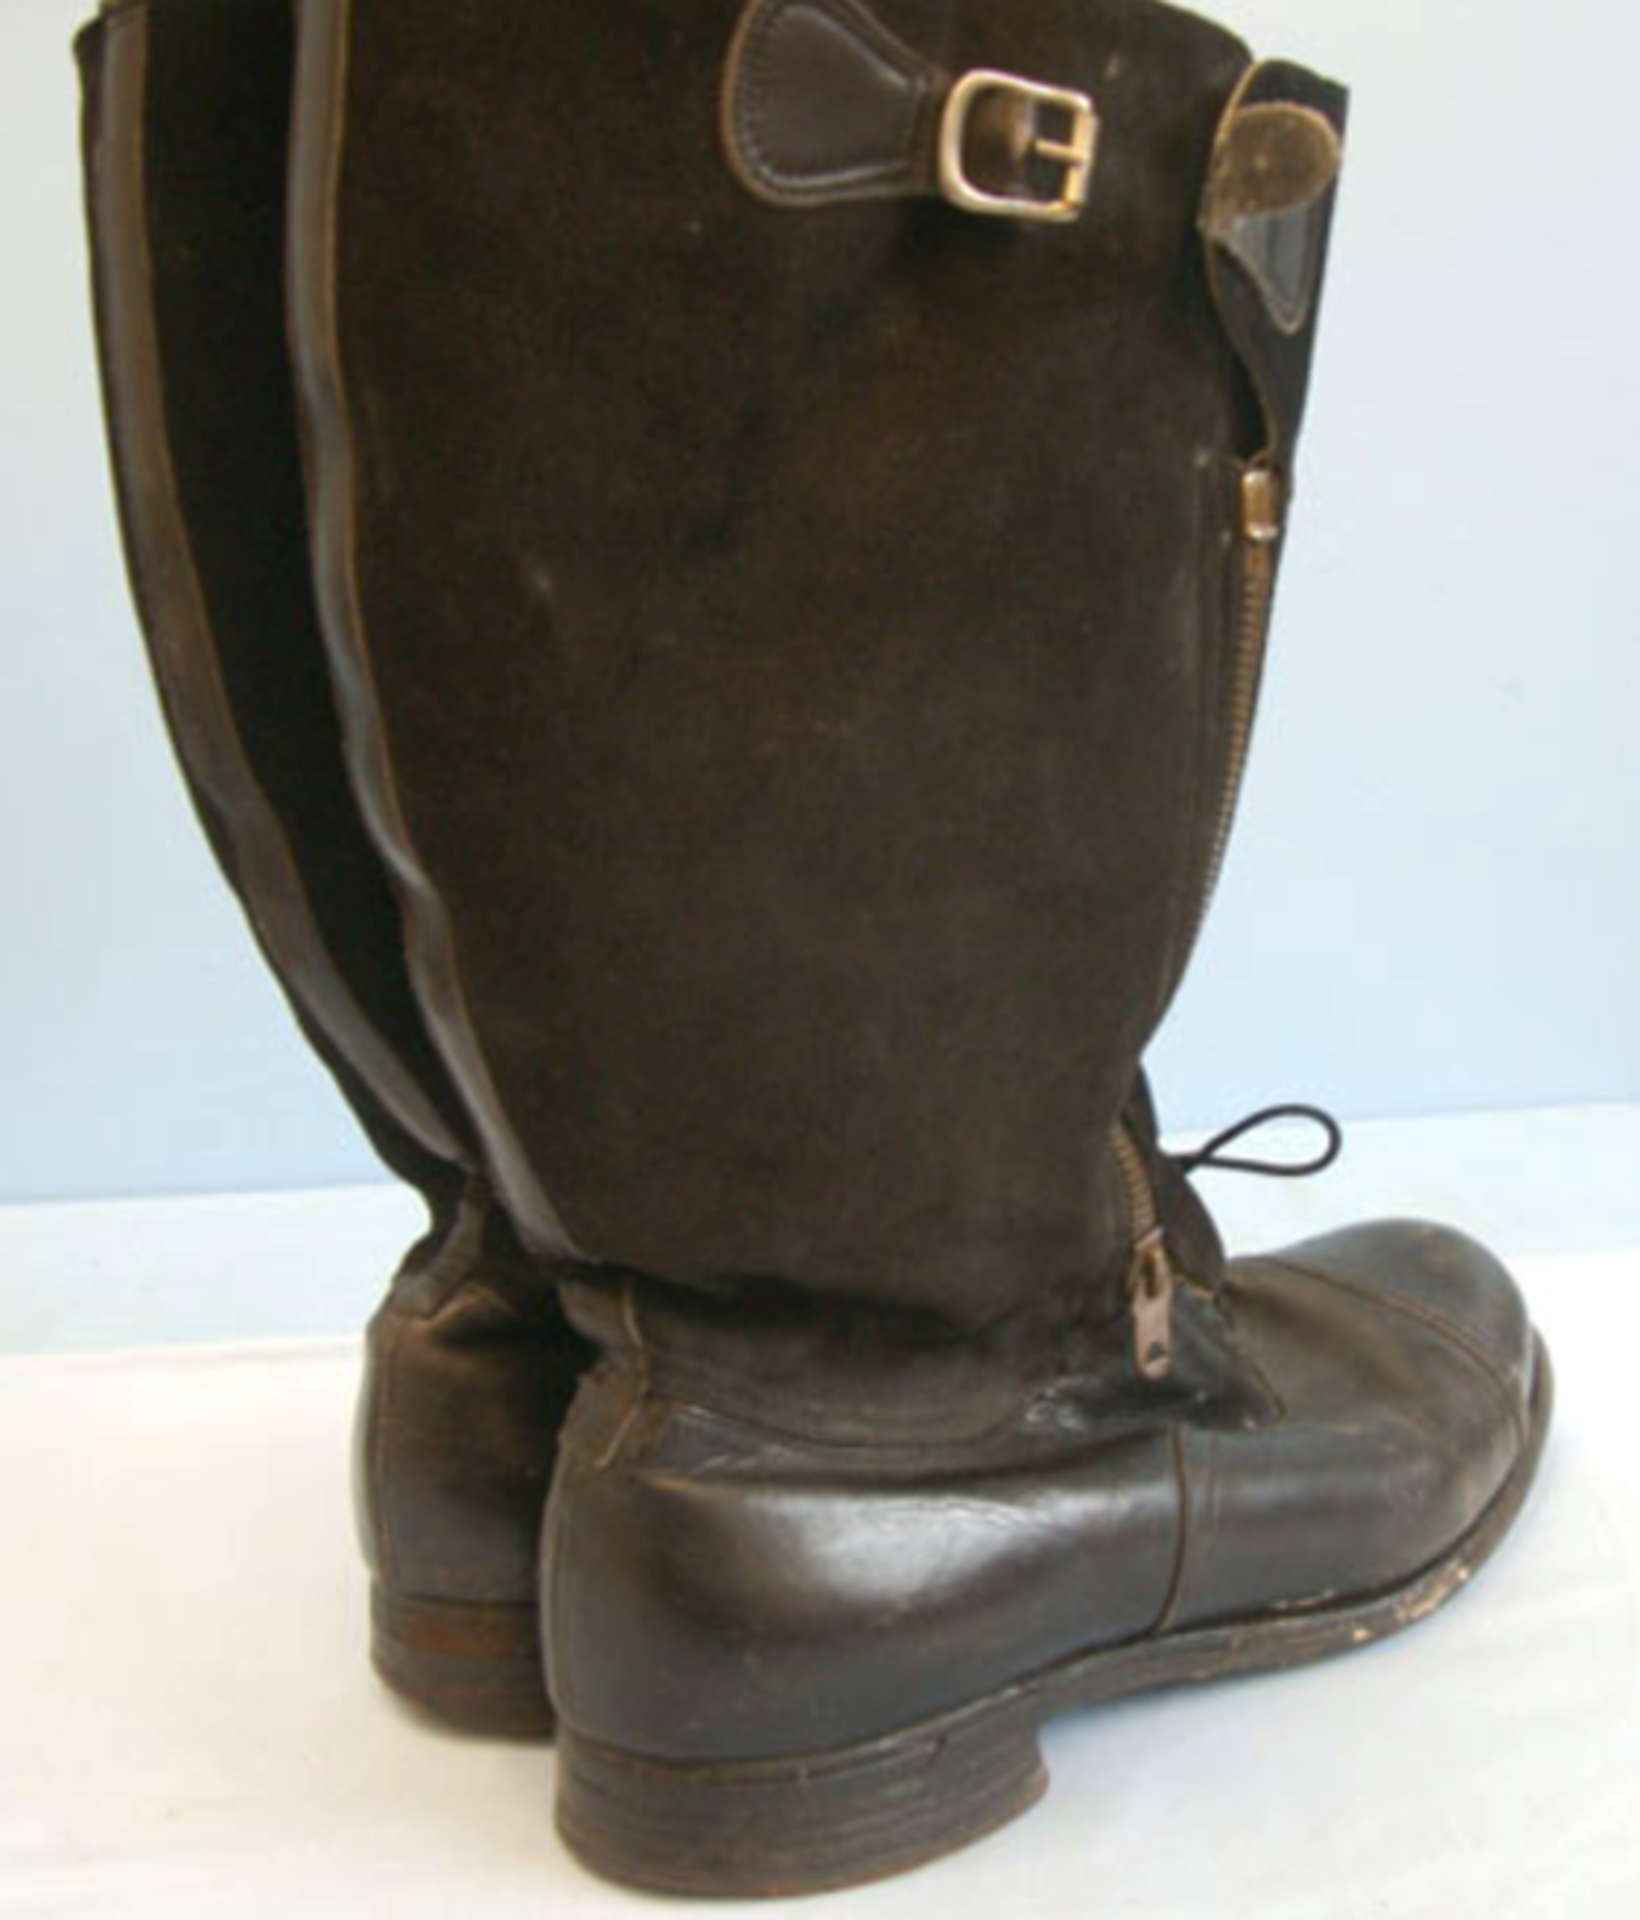 WW2 1943 Pattern Royal Air Force Pilot/Aircrew Fur Lined Escape Boots.   A pair of WW2 1943 Pattern, - Image 3 of 3